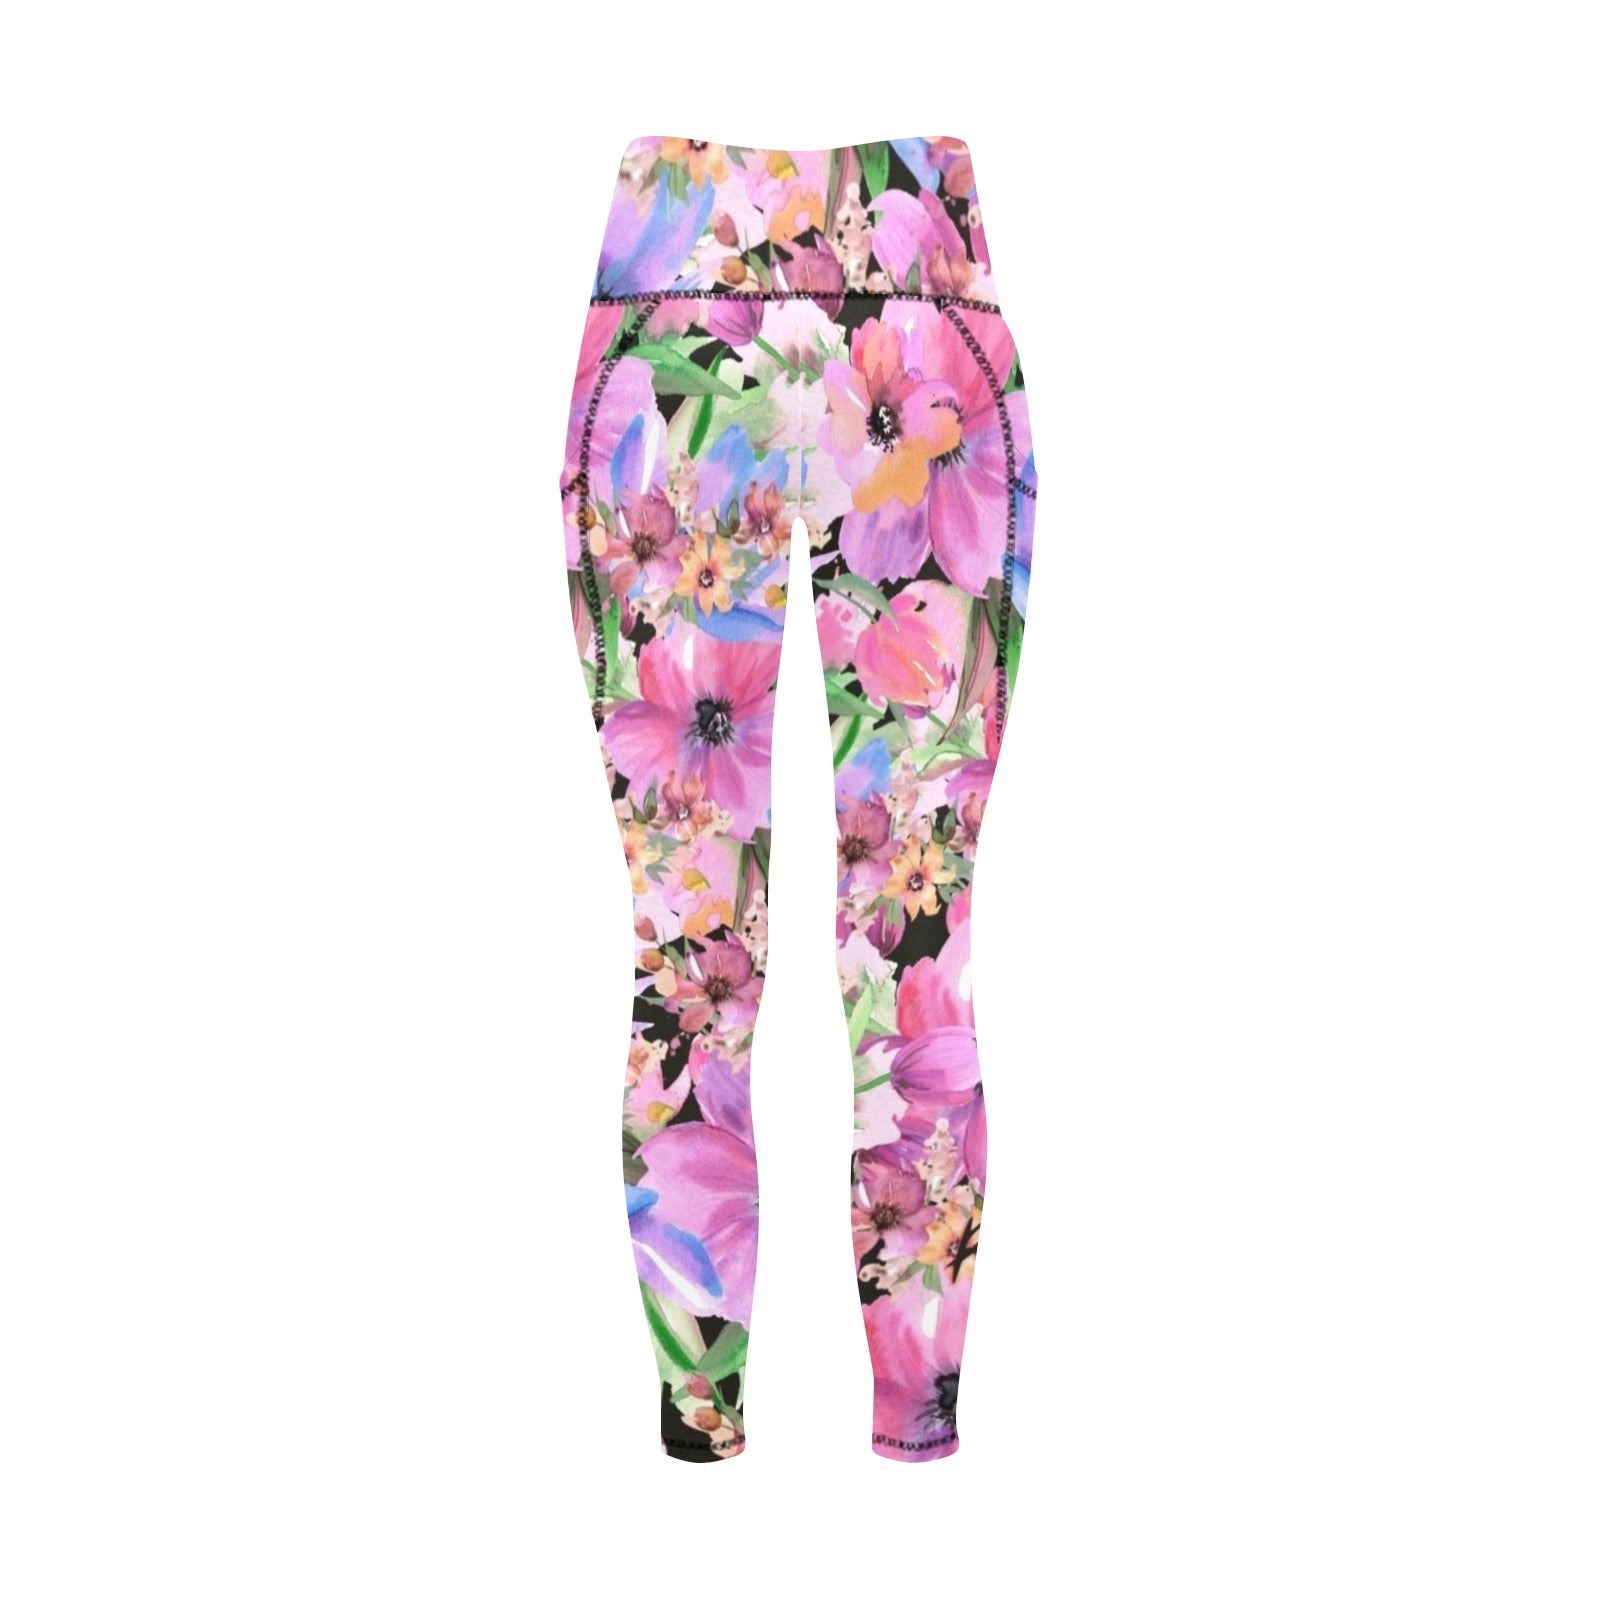 Bright Pink Floral - Women's Leggings with Pockets Women's Leggings with Pockets S - 2XL Plants